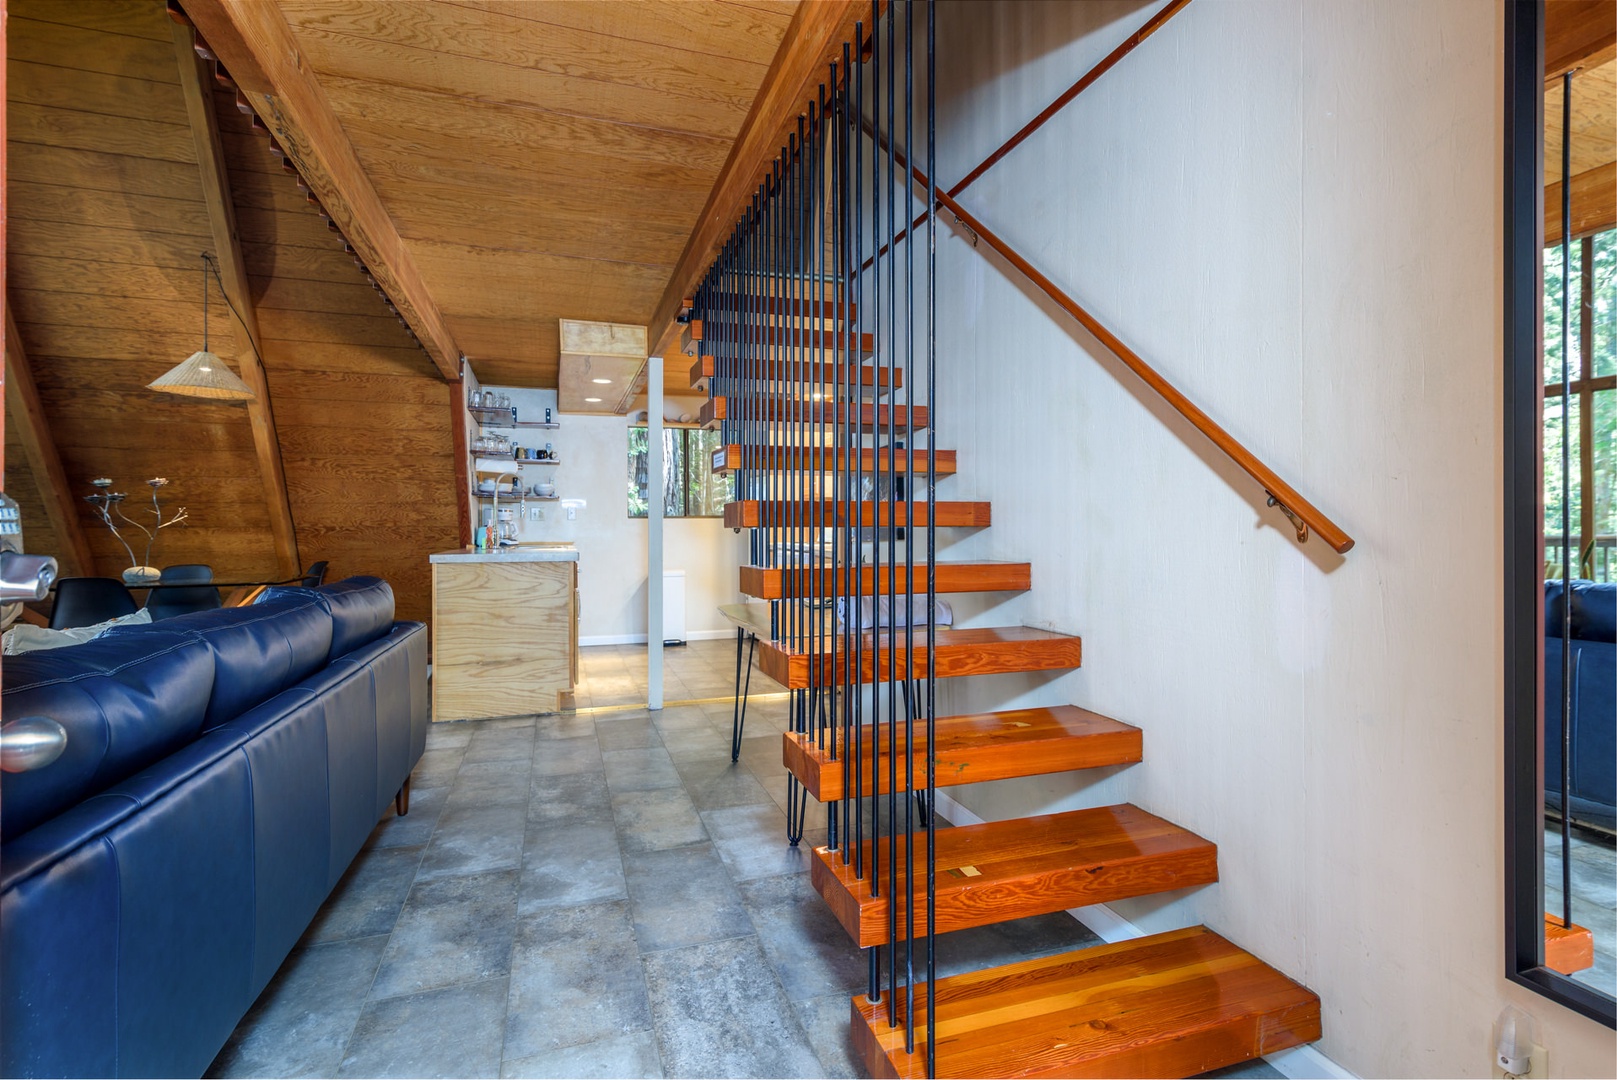 Stairs to Loft